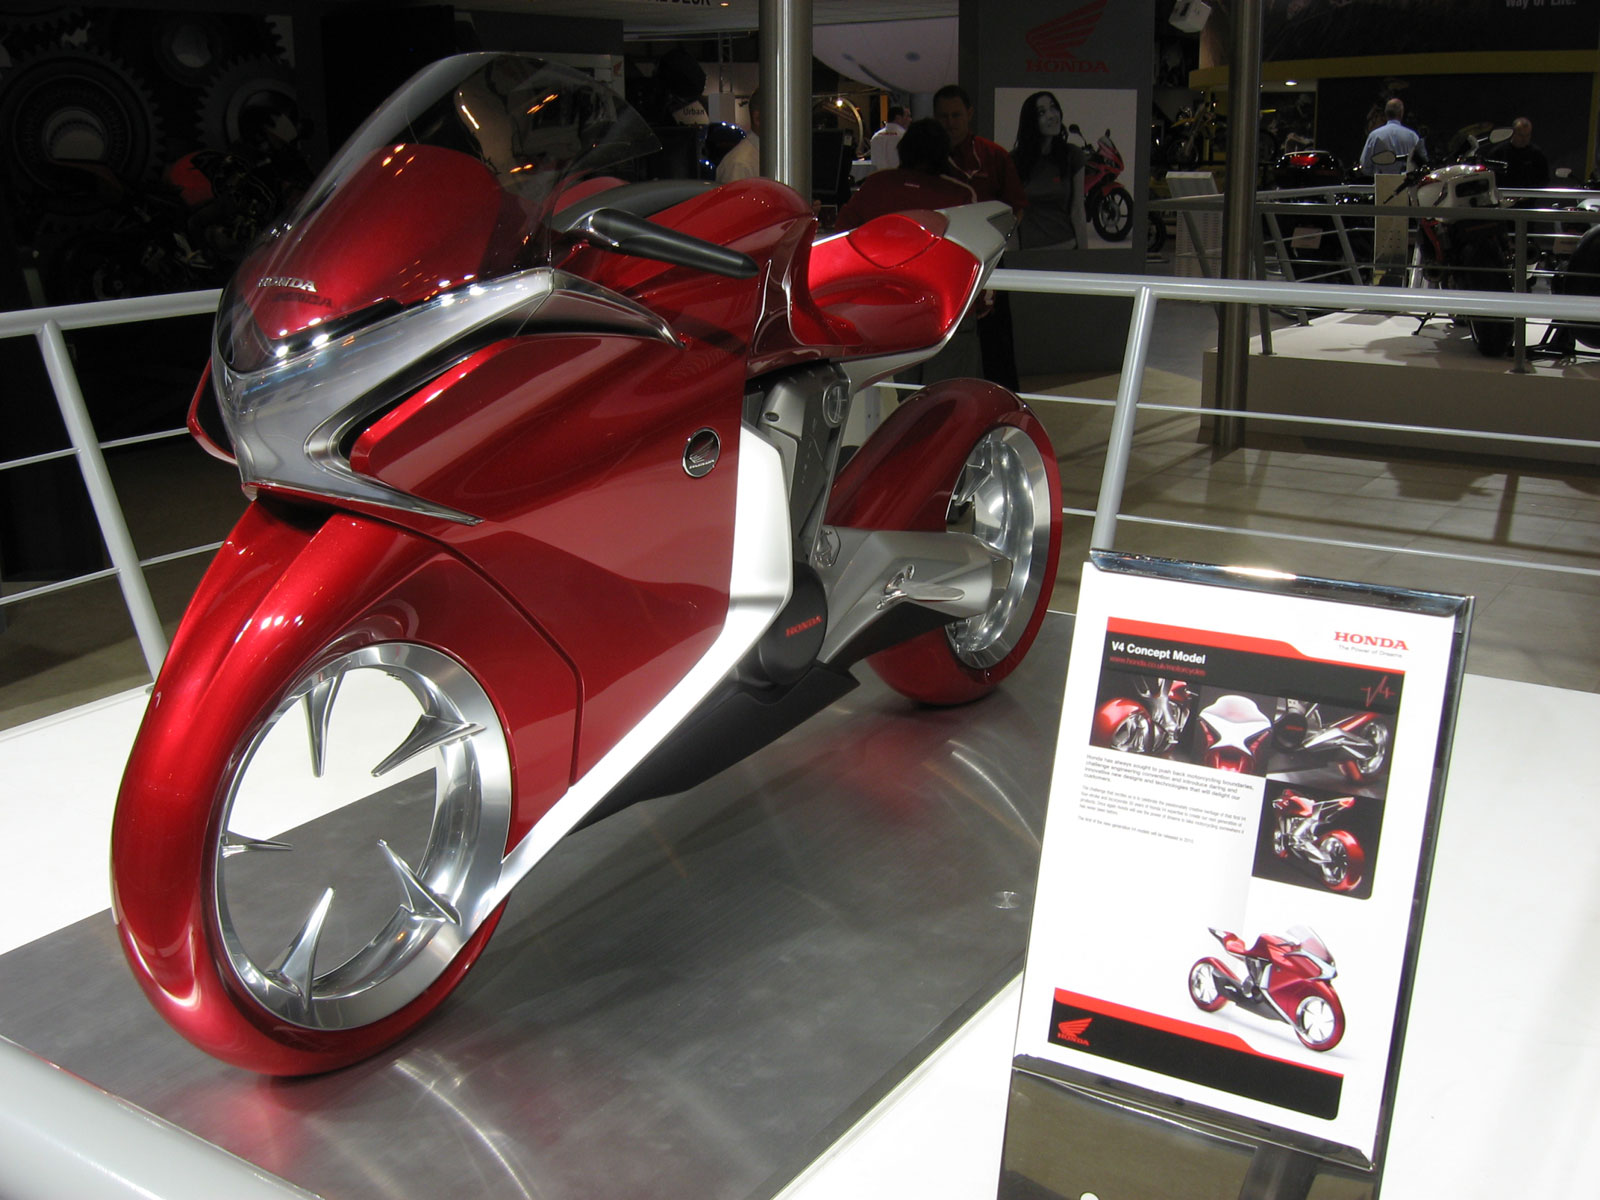 concept bike at the